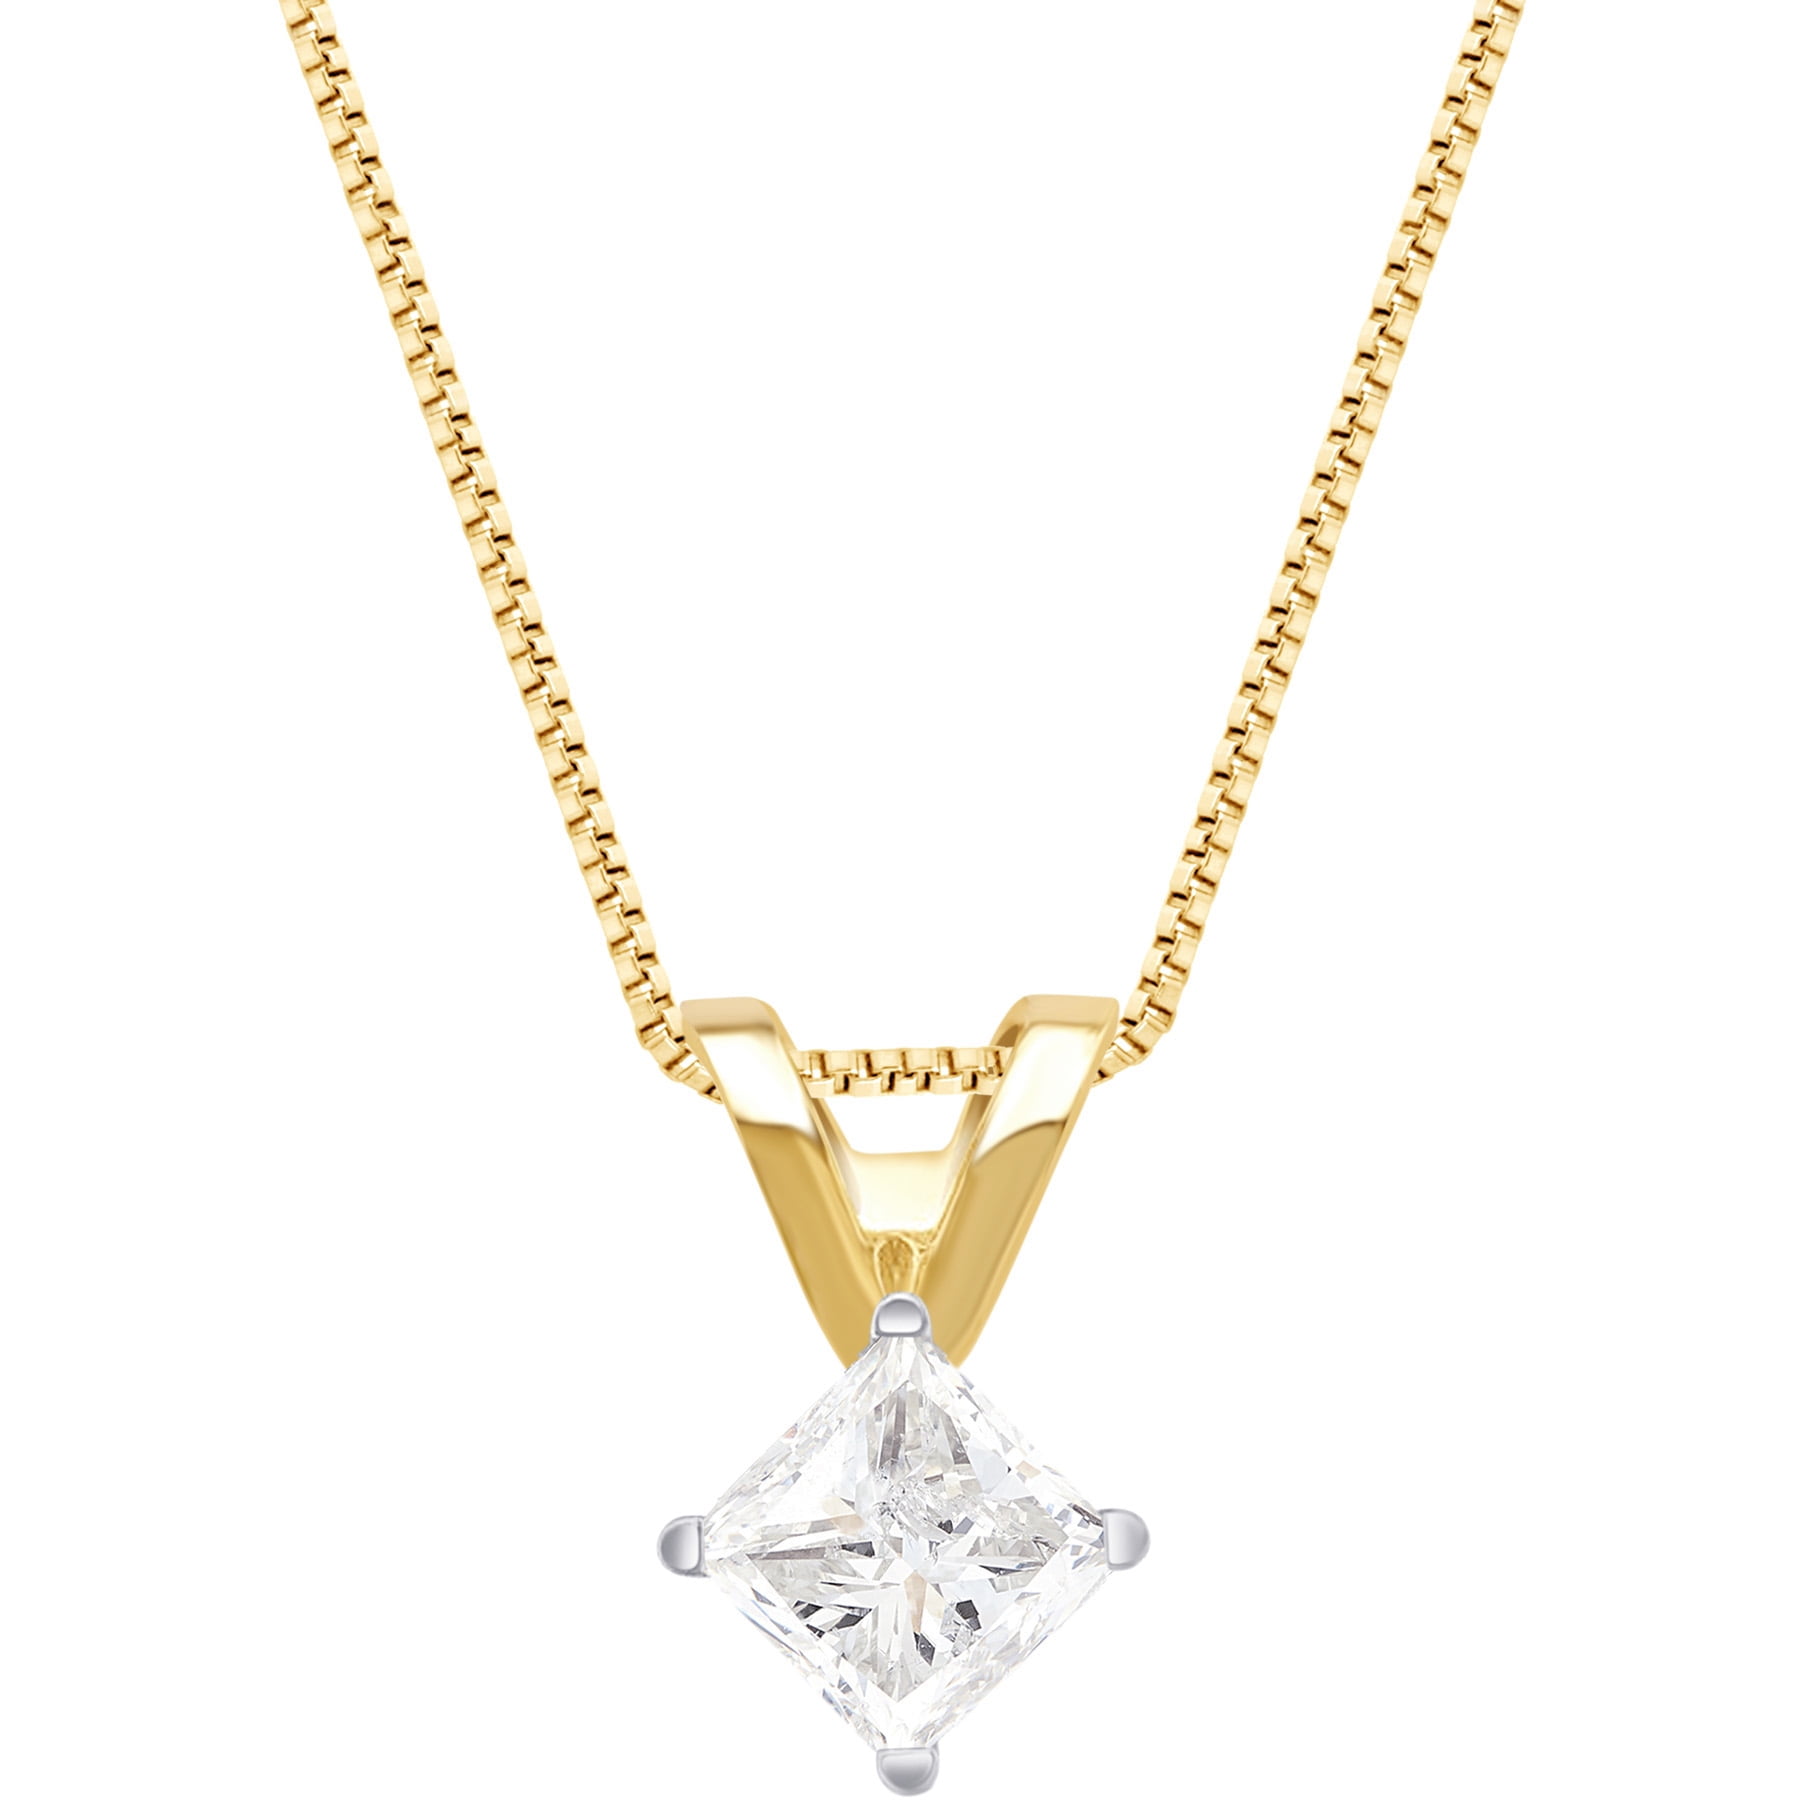 2Ct Princess Solitaire Simulated Diamond Pendant Necklace 14K Yellow Gold Finish